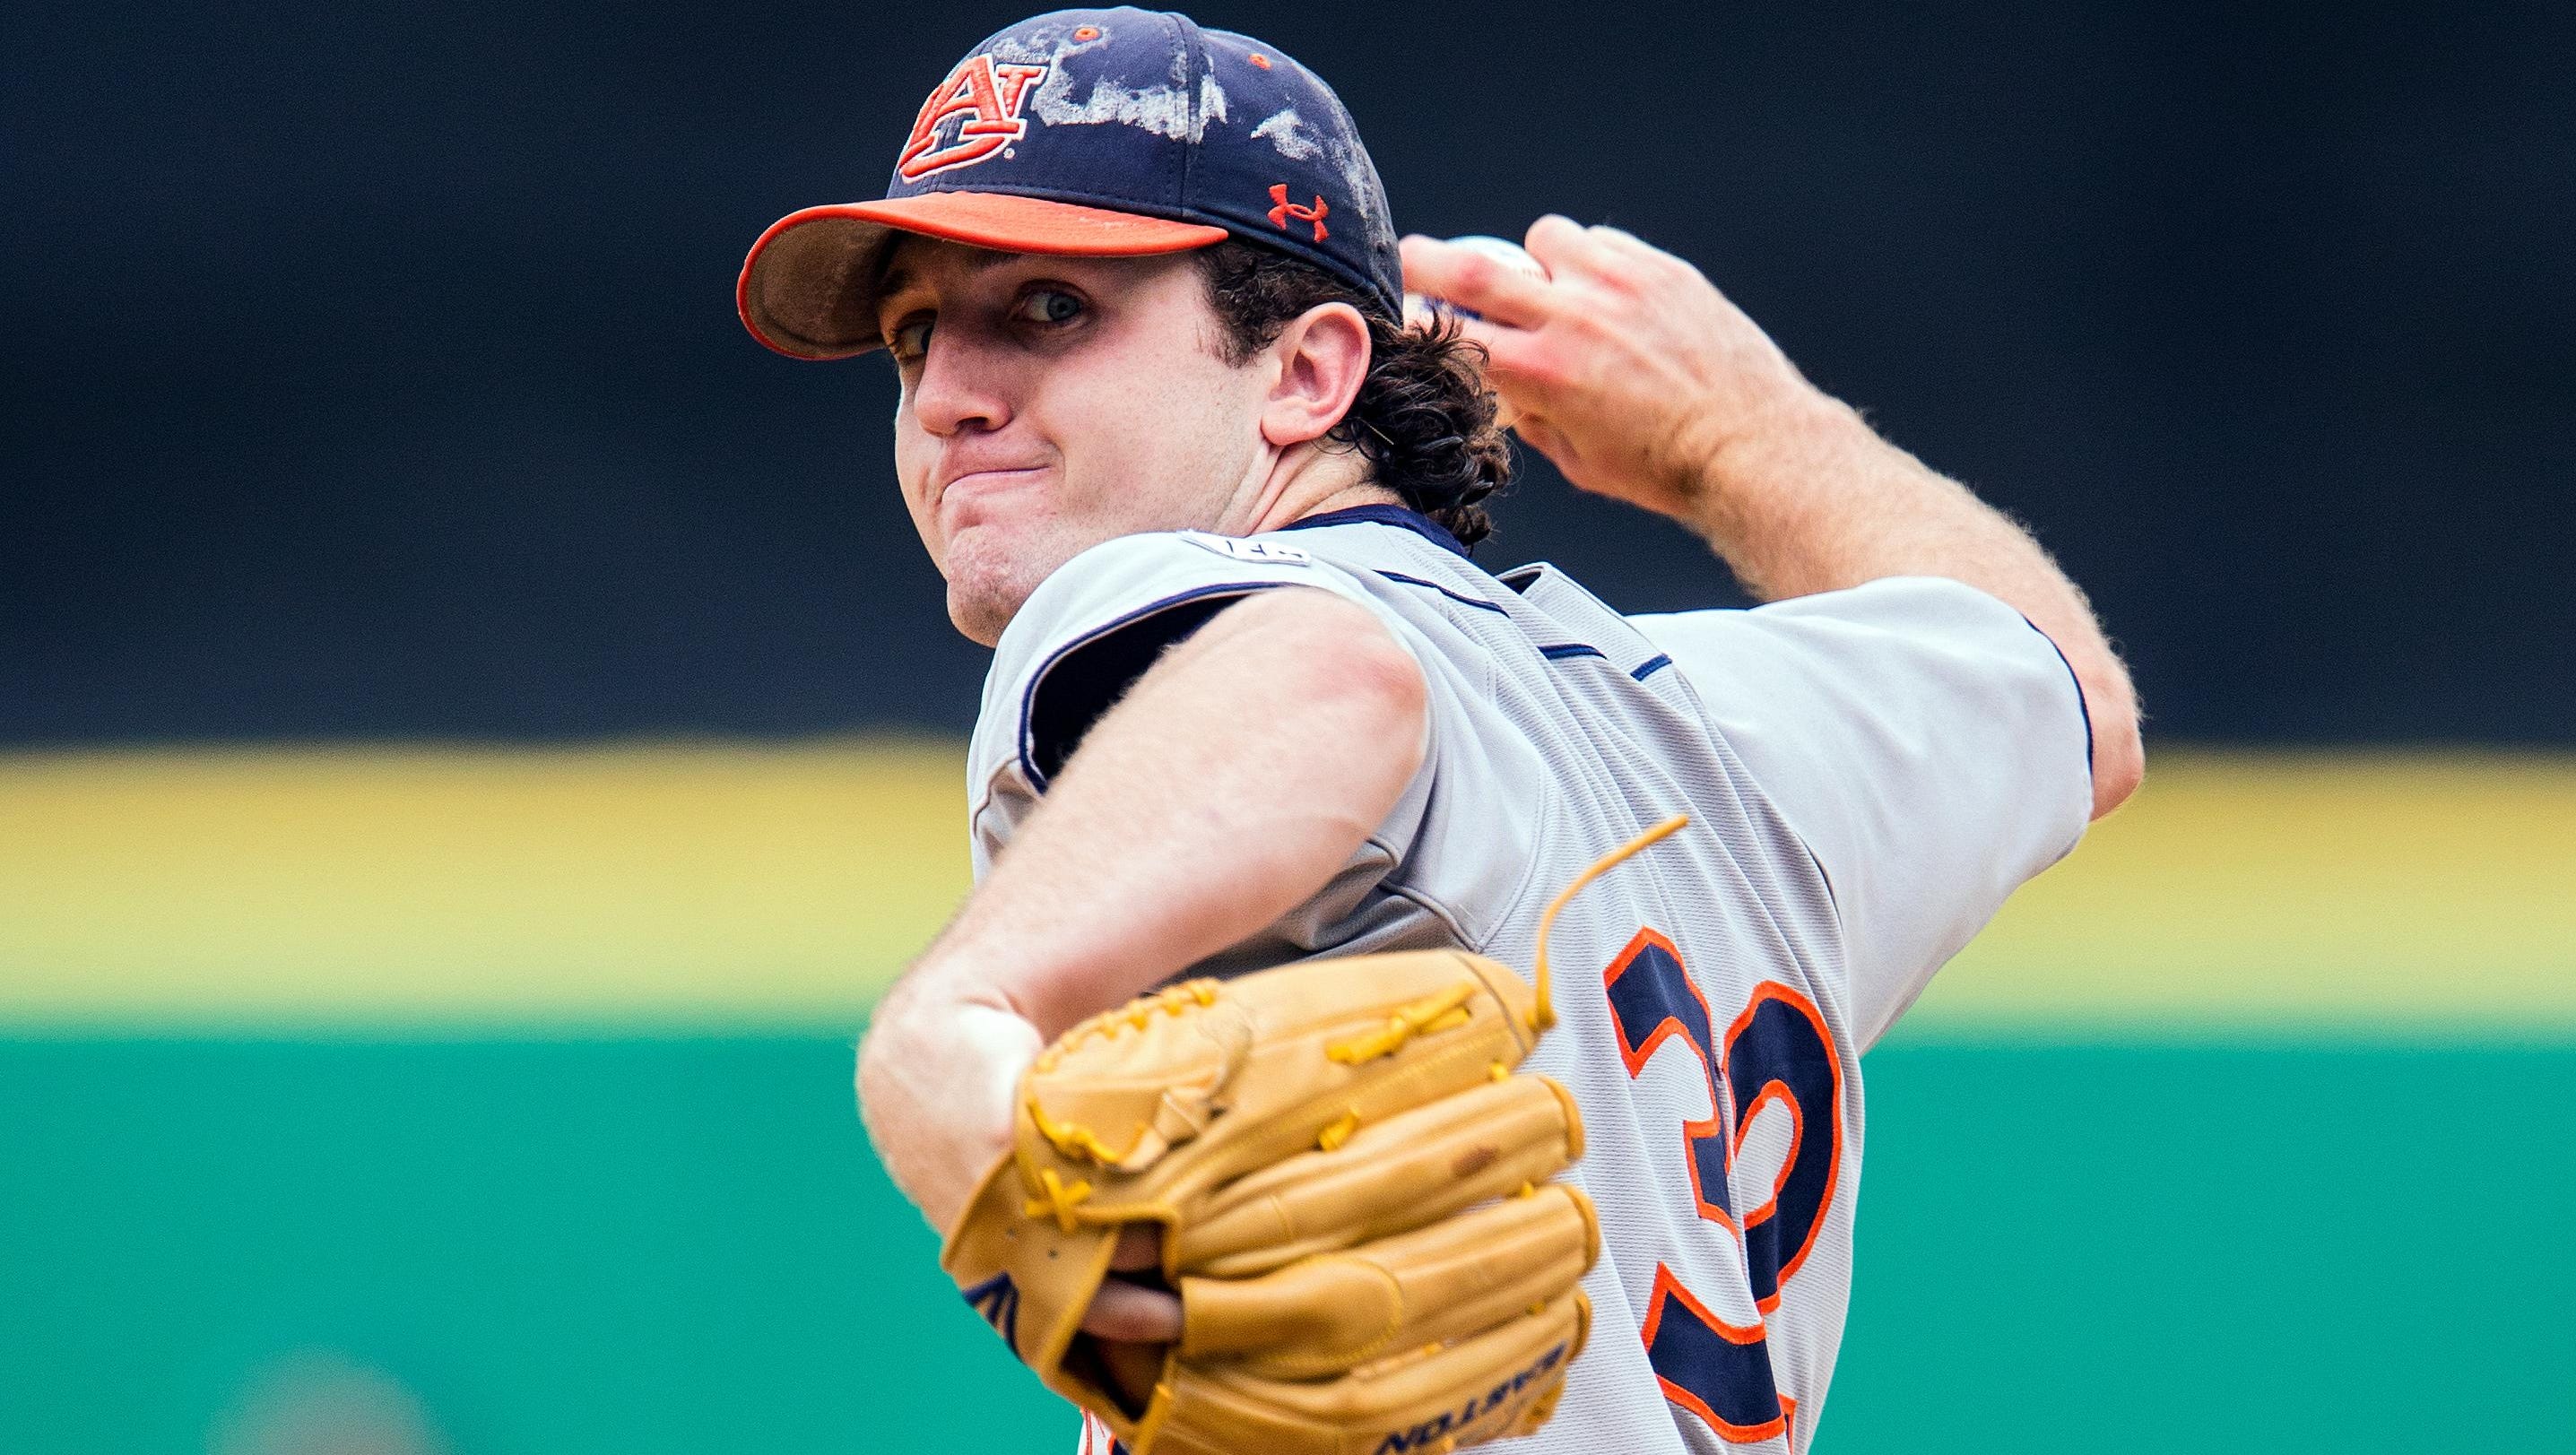 The Tigers drafted Casey Mize out of Auburn No. 1 overall in 2018.